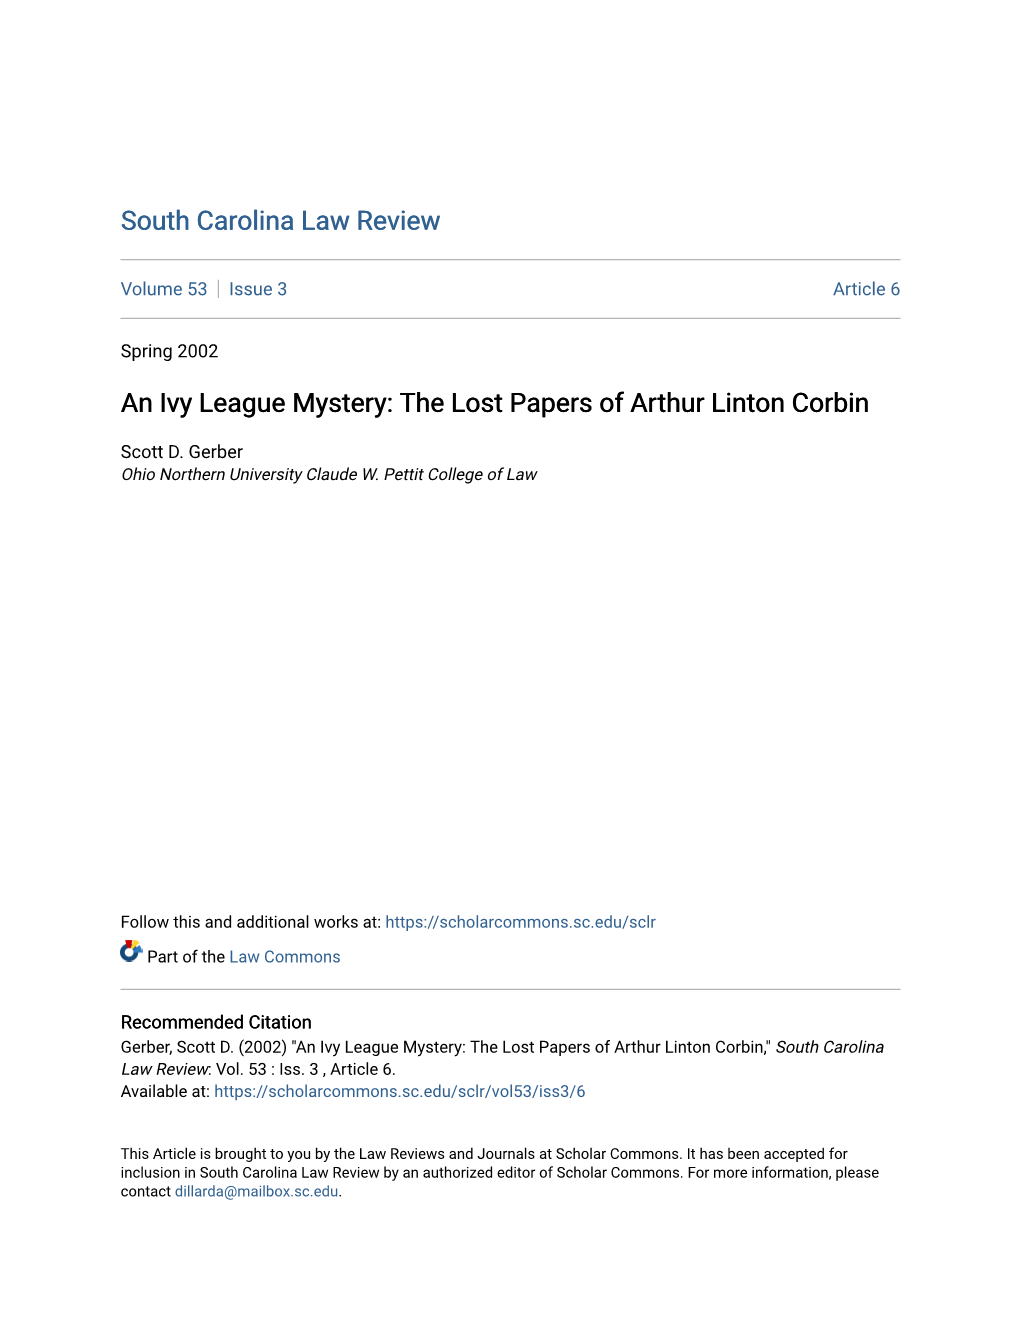 An Ivy League Mystery: the Lost Papers of Arthur Linton Corbin